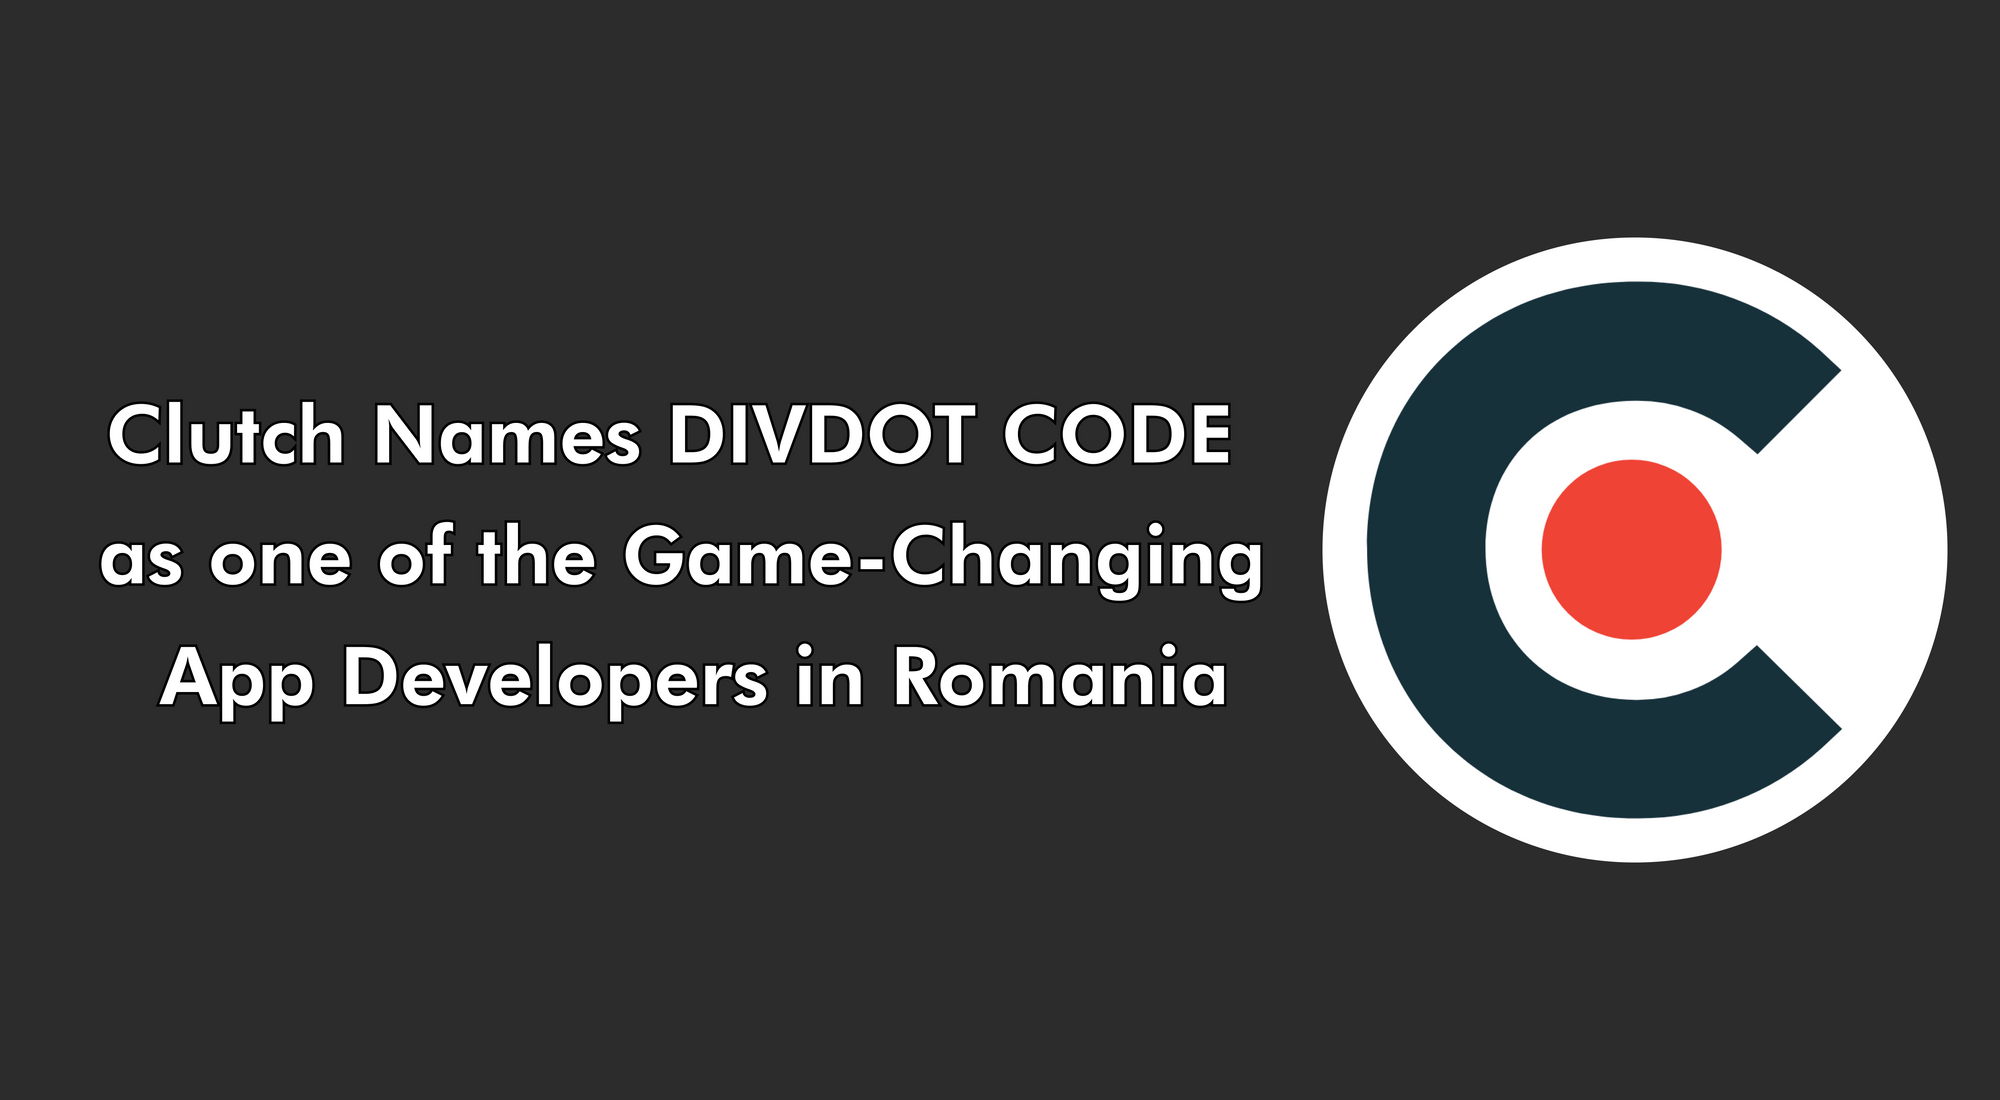 Clutch Names DIVDOT CODE as one of the Game-Changing App Developers in Romania